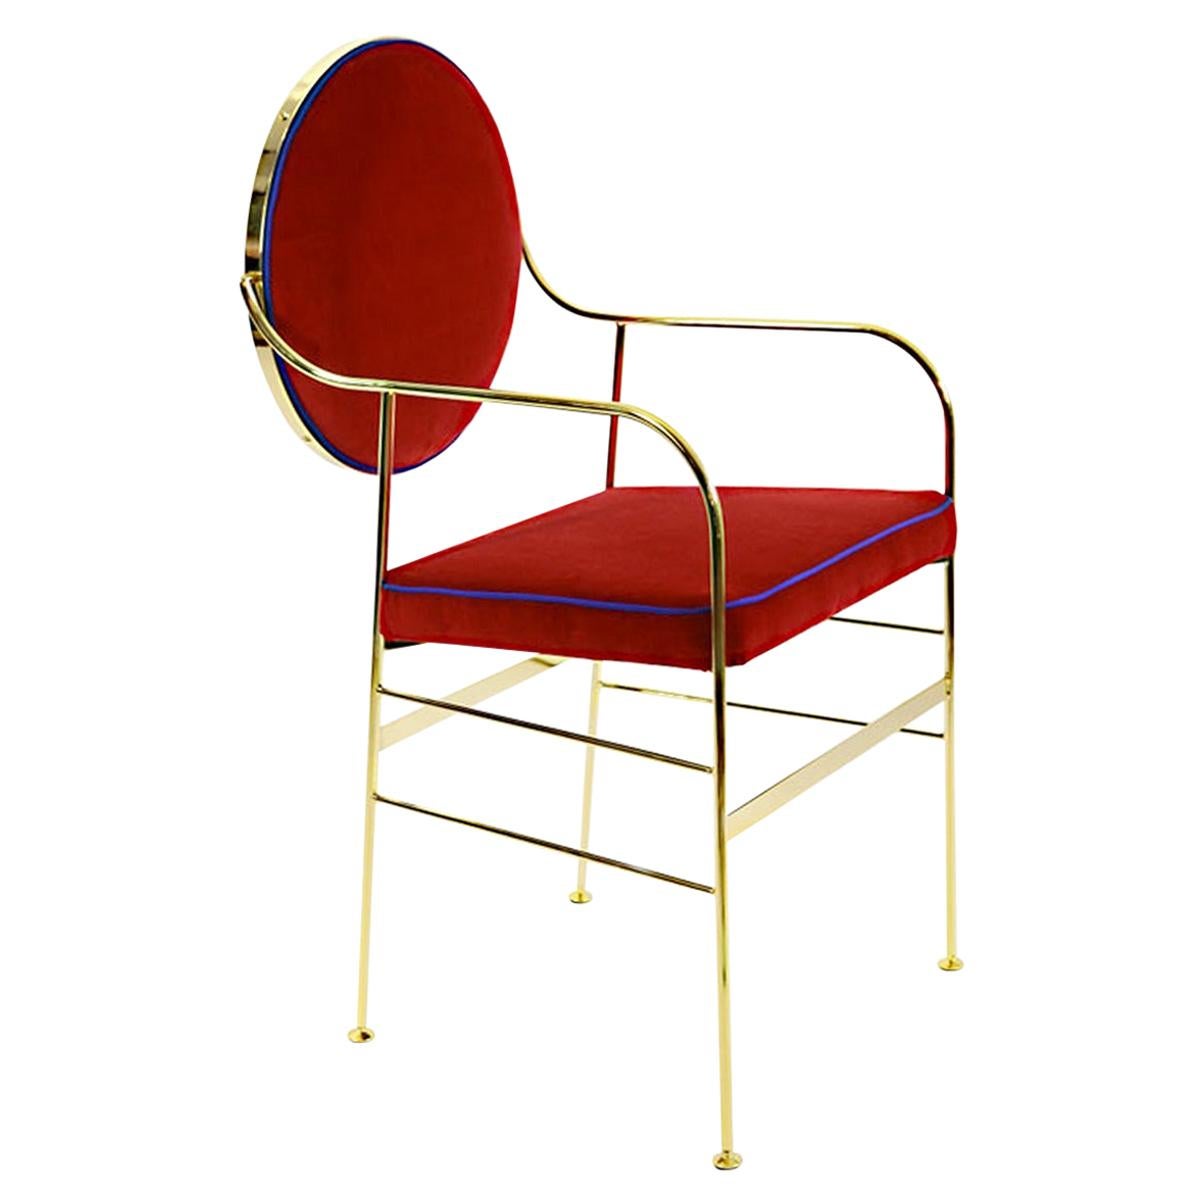 In Stock in Los Angeles, Velvet Dining Chair Red, by Paolo Calcagni